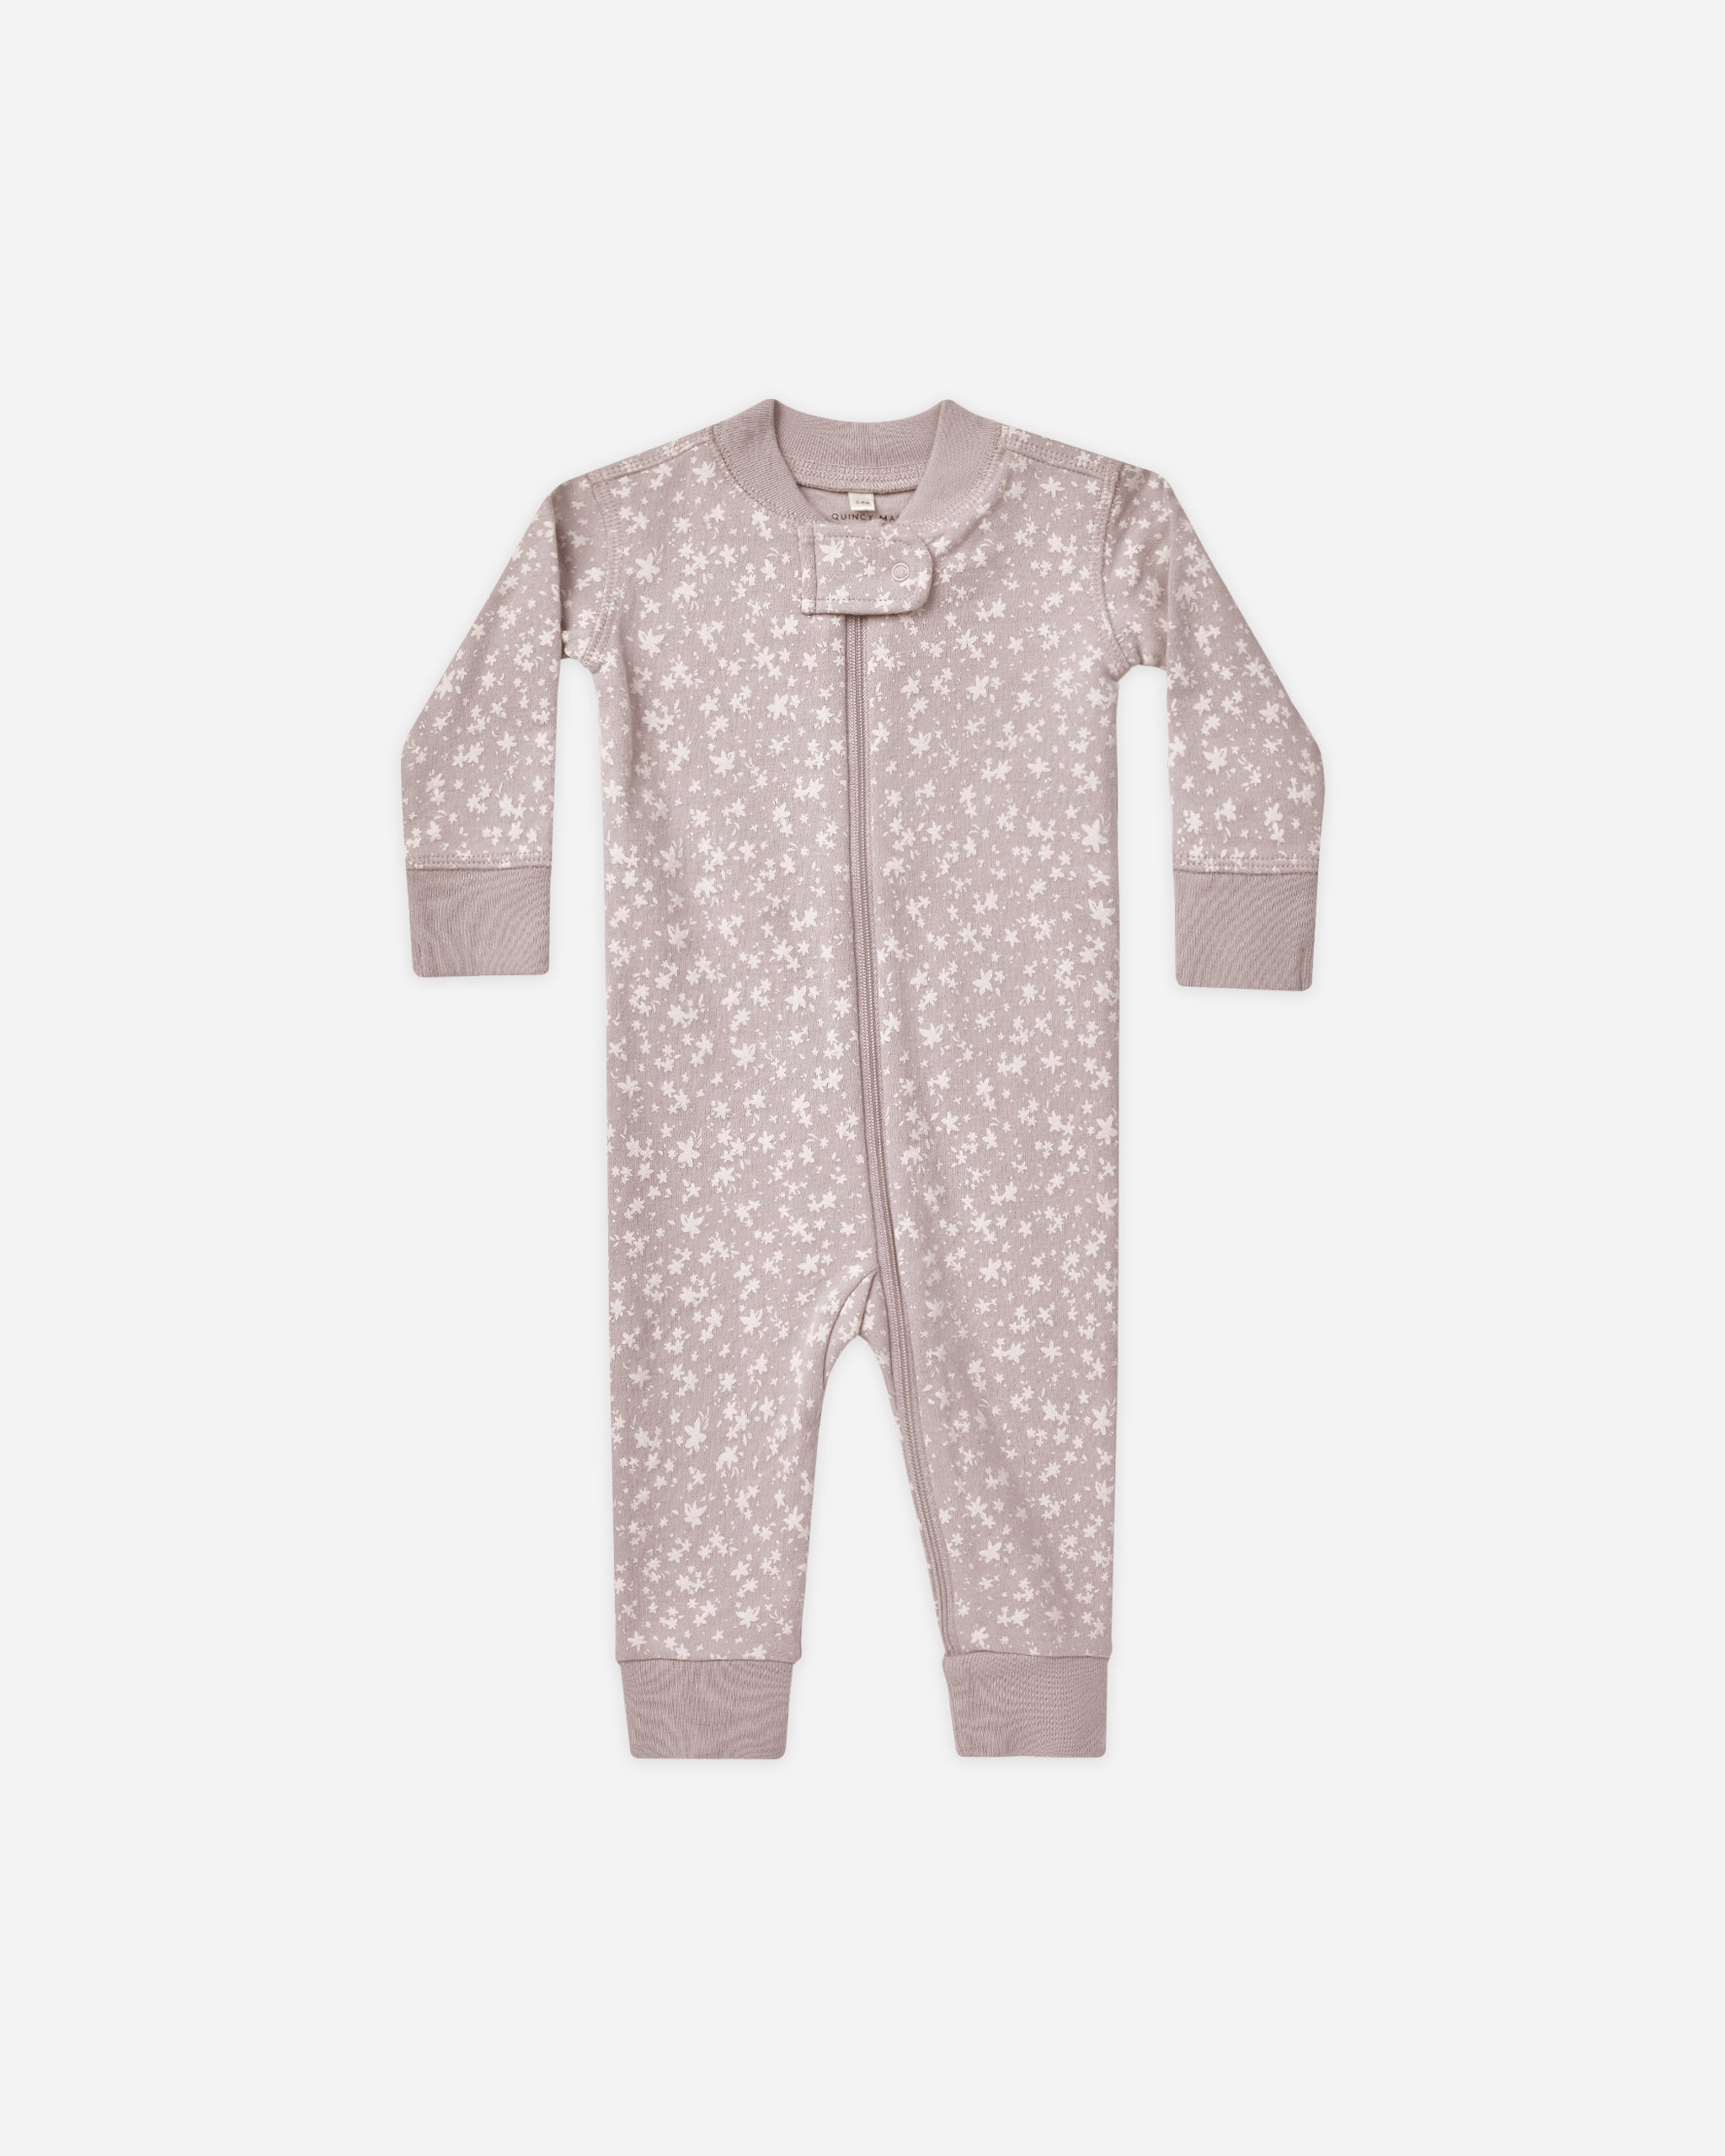 Zip Long Sleeve Sleeper || Scatter - Rylee + Cru | Kids Clothes | Trendy Baby Clothes | Modern Infant Outfits |